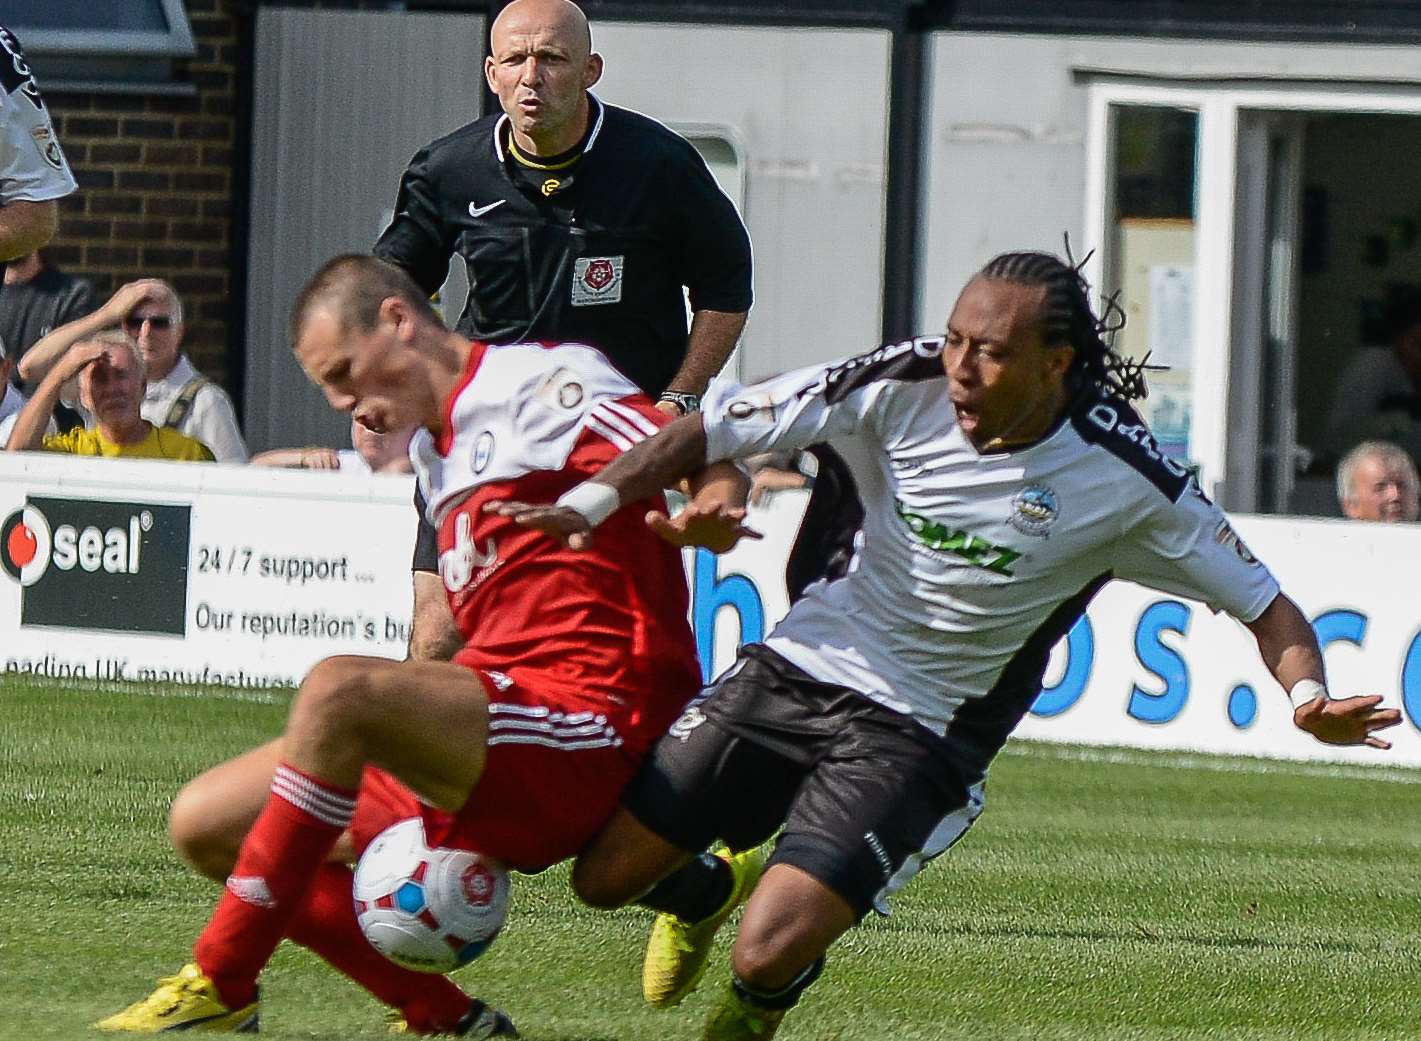 Dover's Ricky Modeste, right, in action against Halifax in the Vanarama Conference clash at Crabble